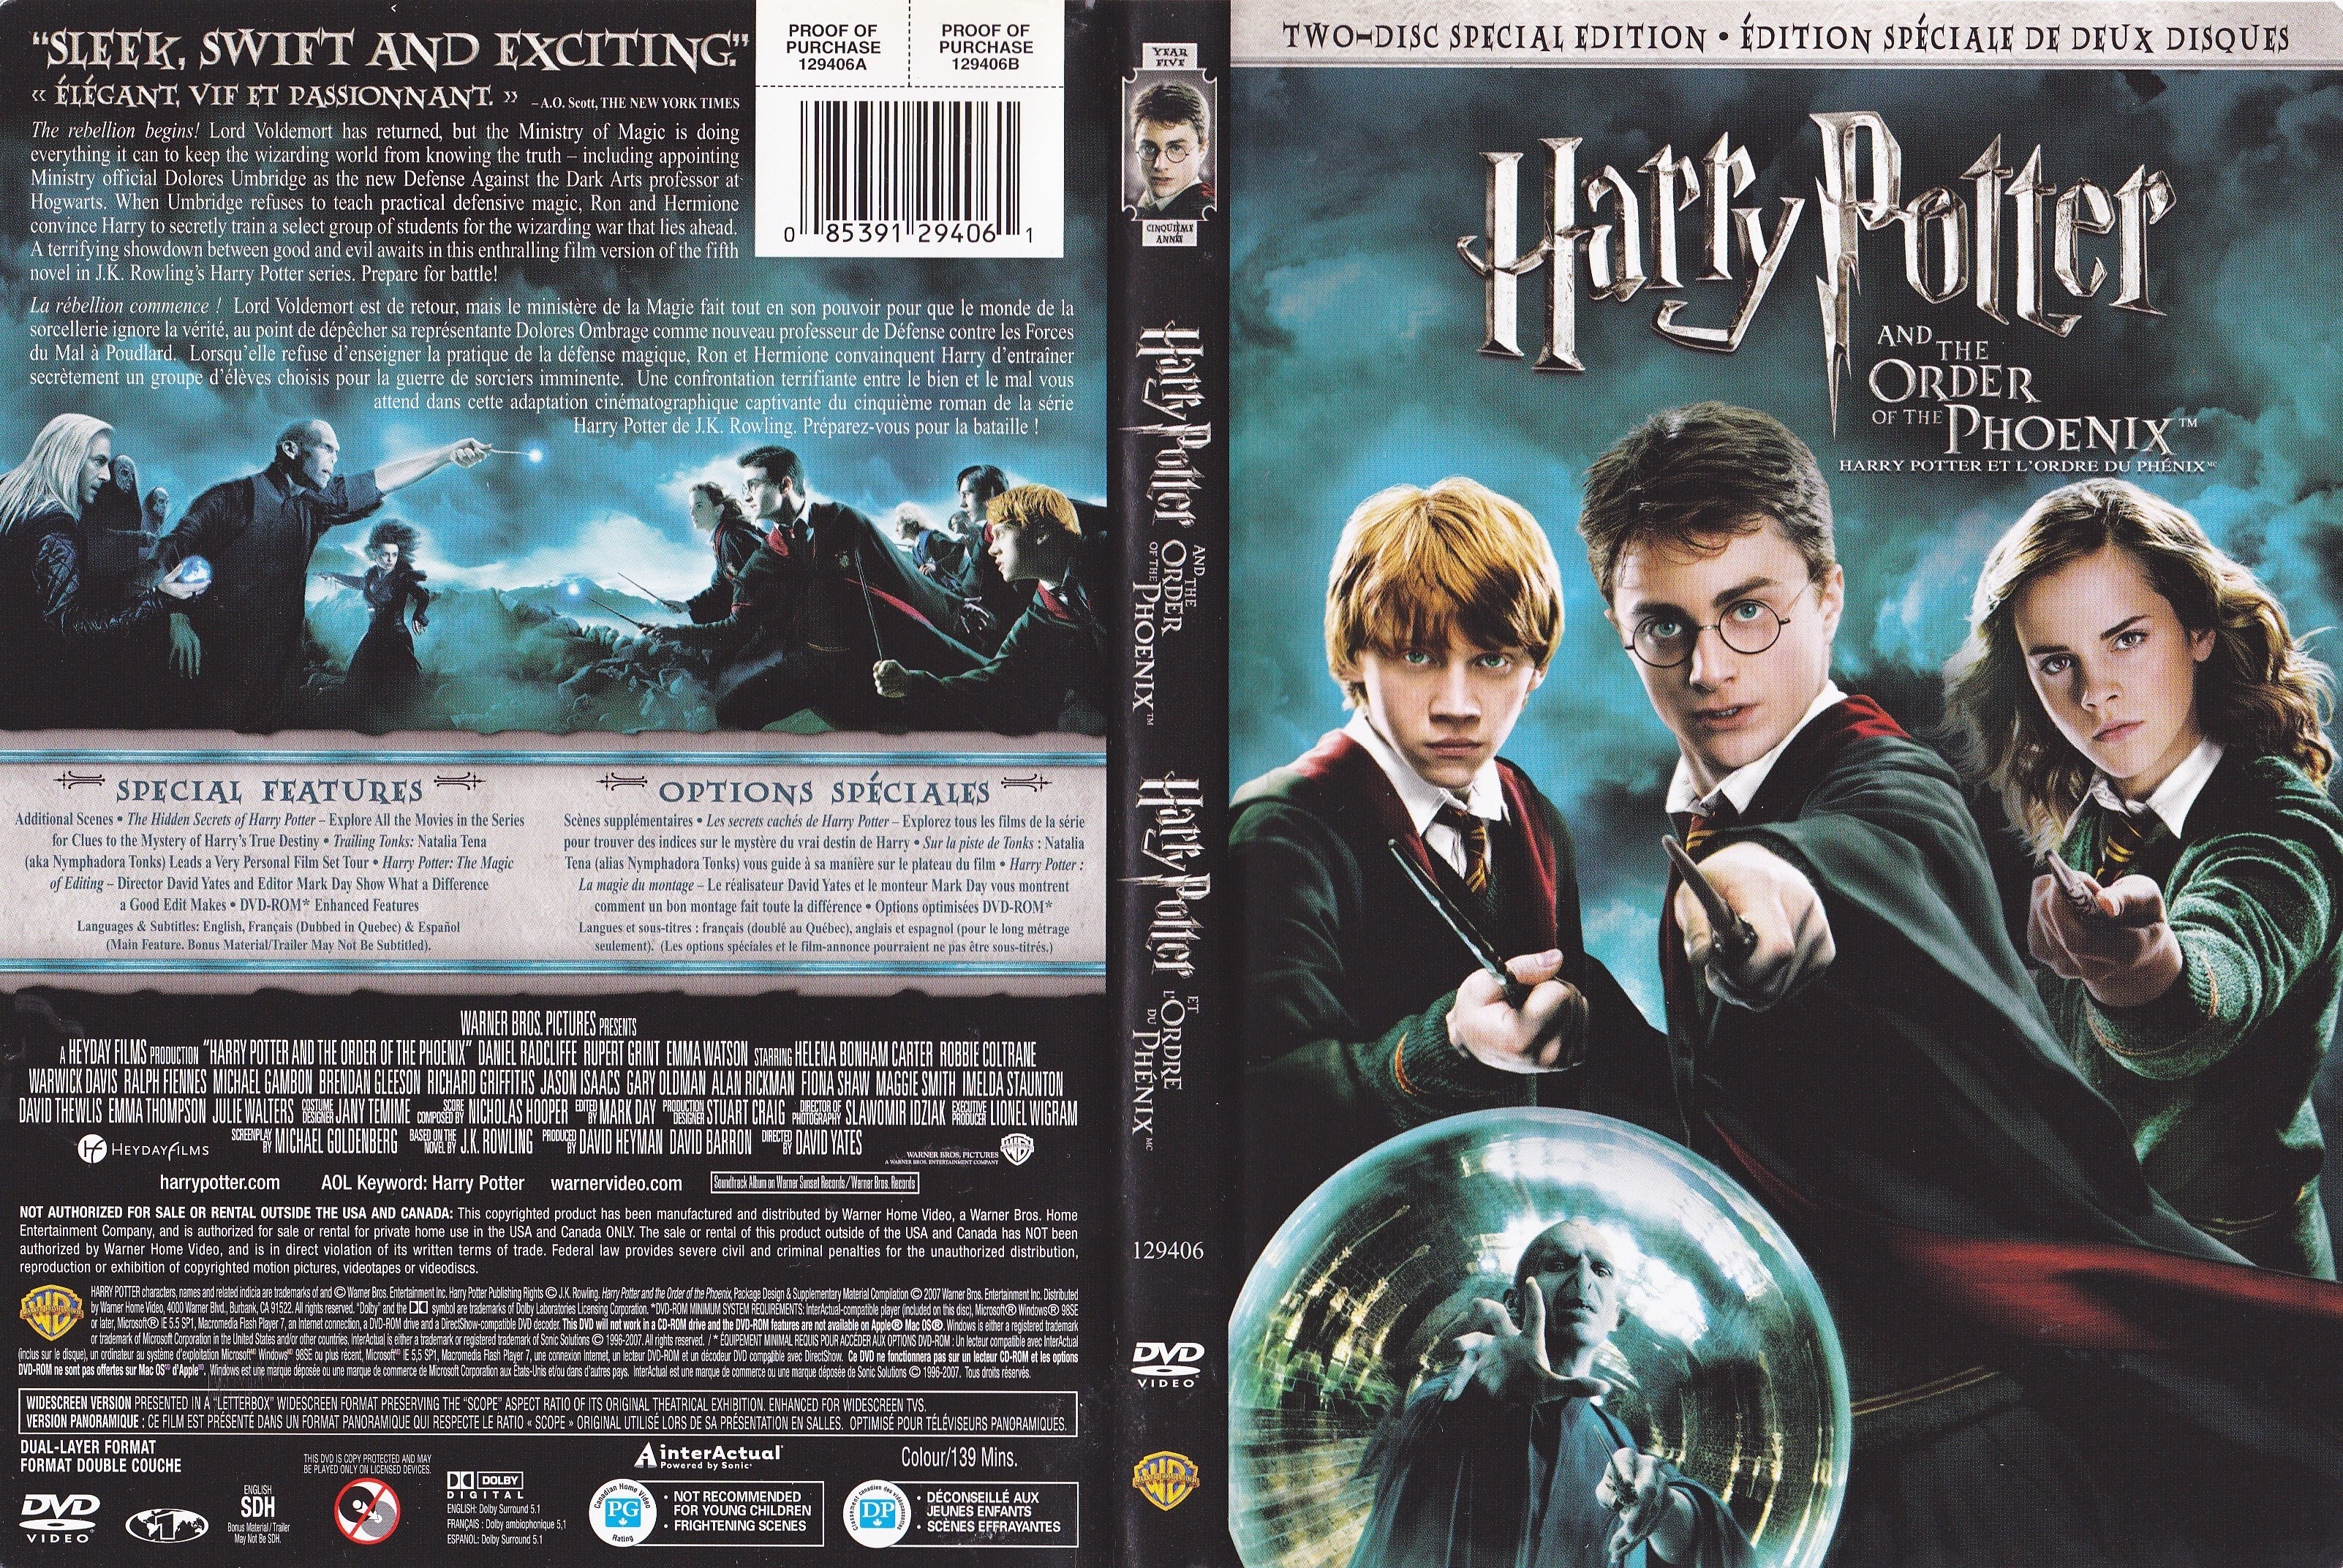 Jaquette DVD Harry potter And the order of the phoenix - Harry Potter et l